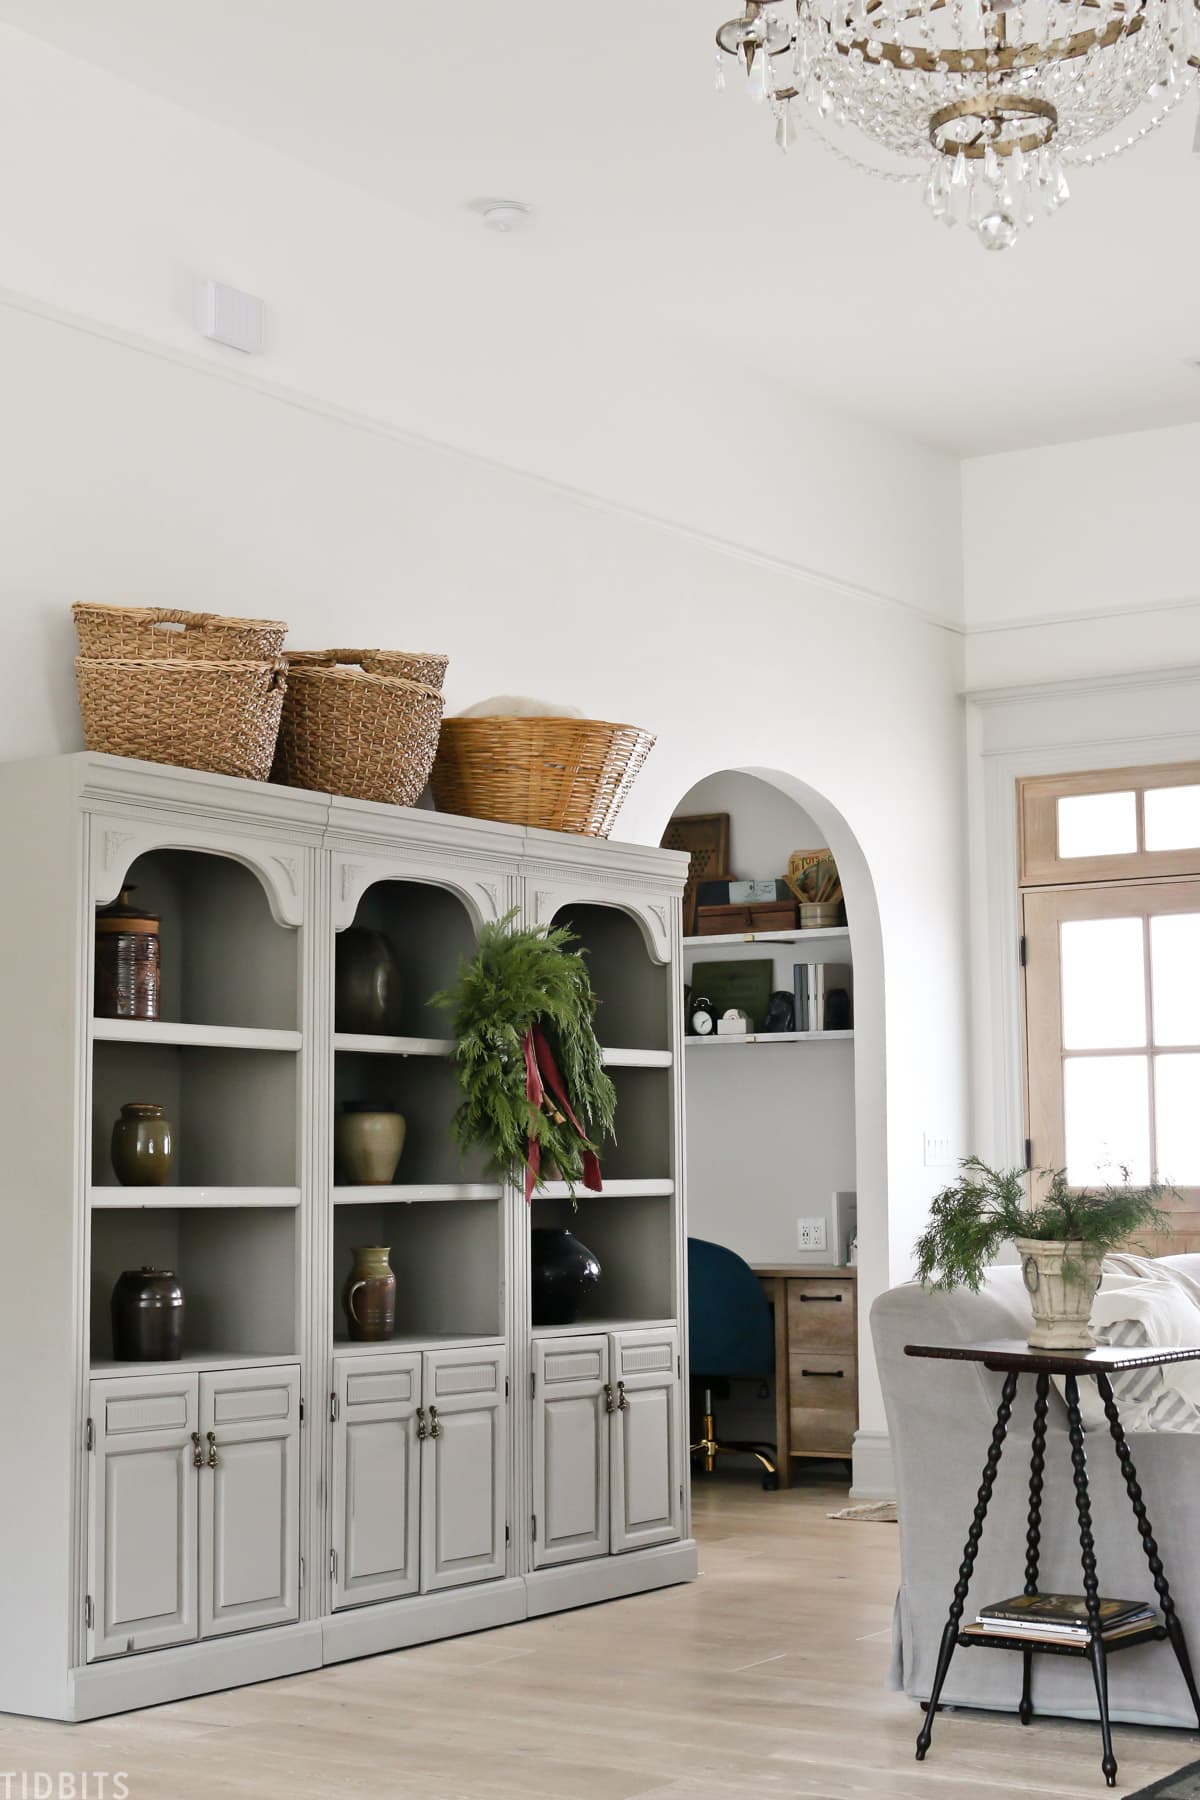 refurbished bookshelves with baskets and vases and wreath hanging from center bookshelf